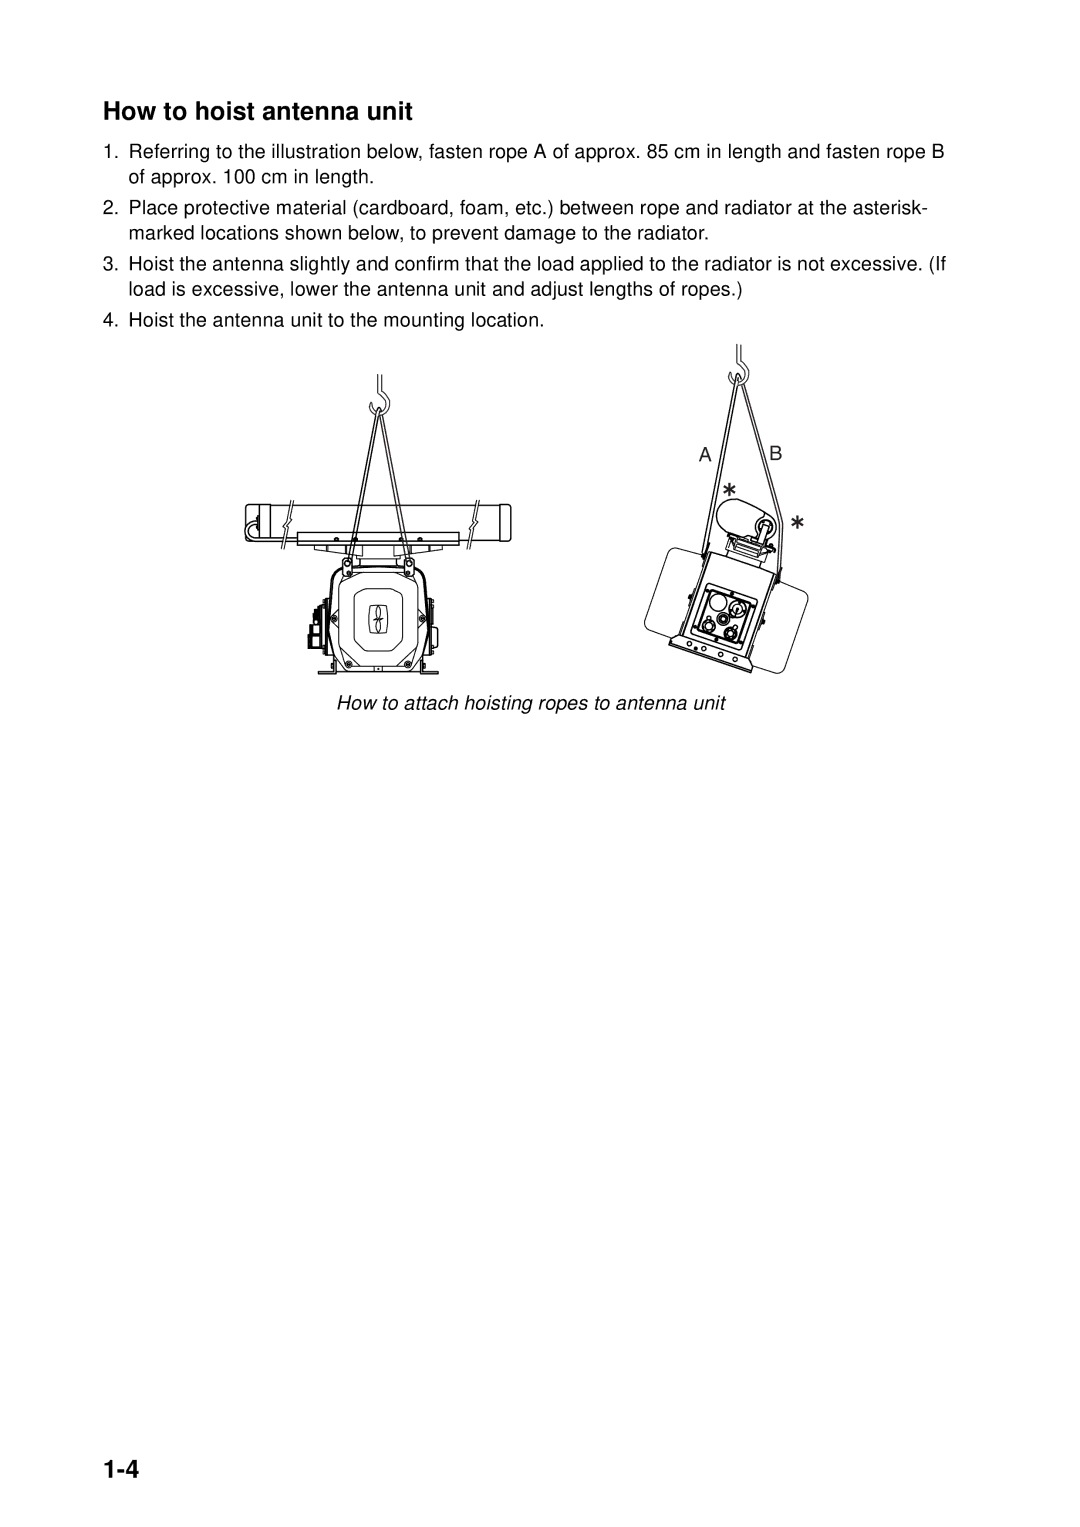 Furuno FAR-2157 installation manual How to hoist antenna unit, How to attach hoisting ropes to antenna unit 